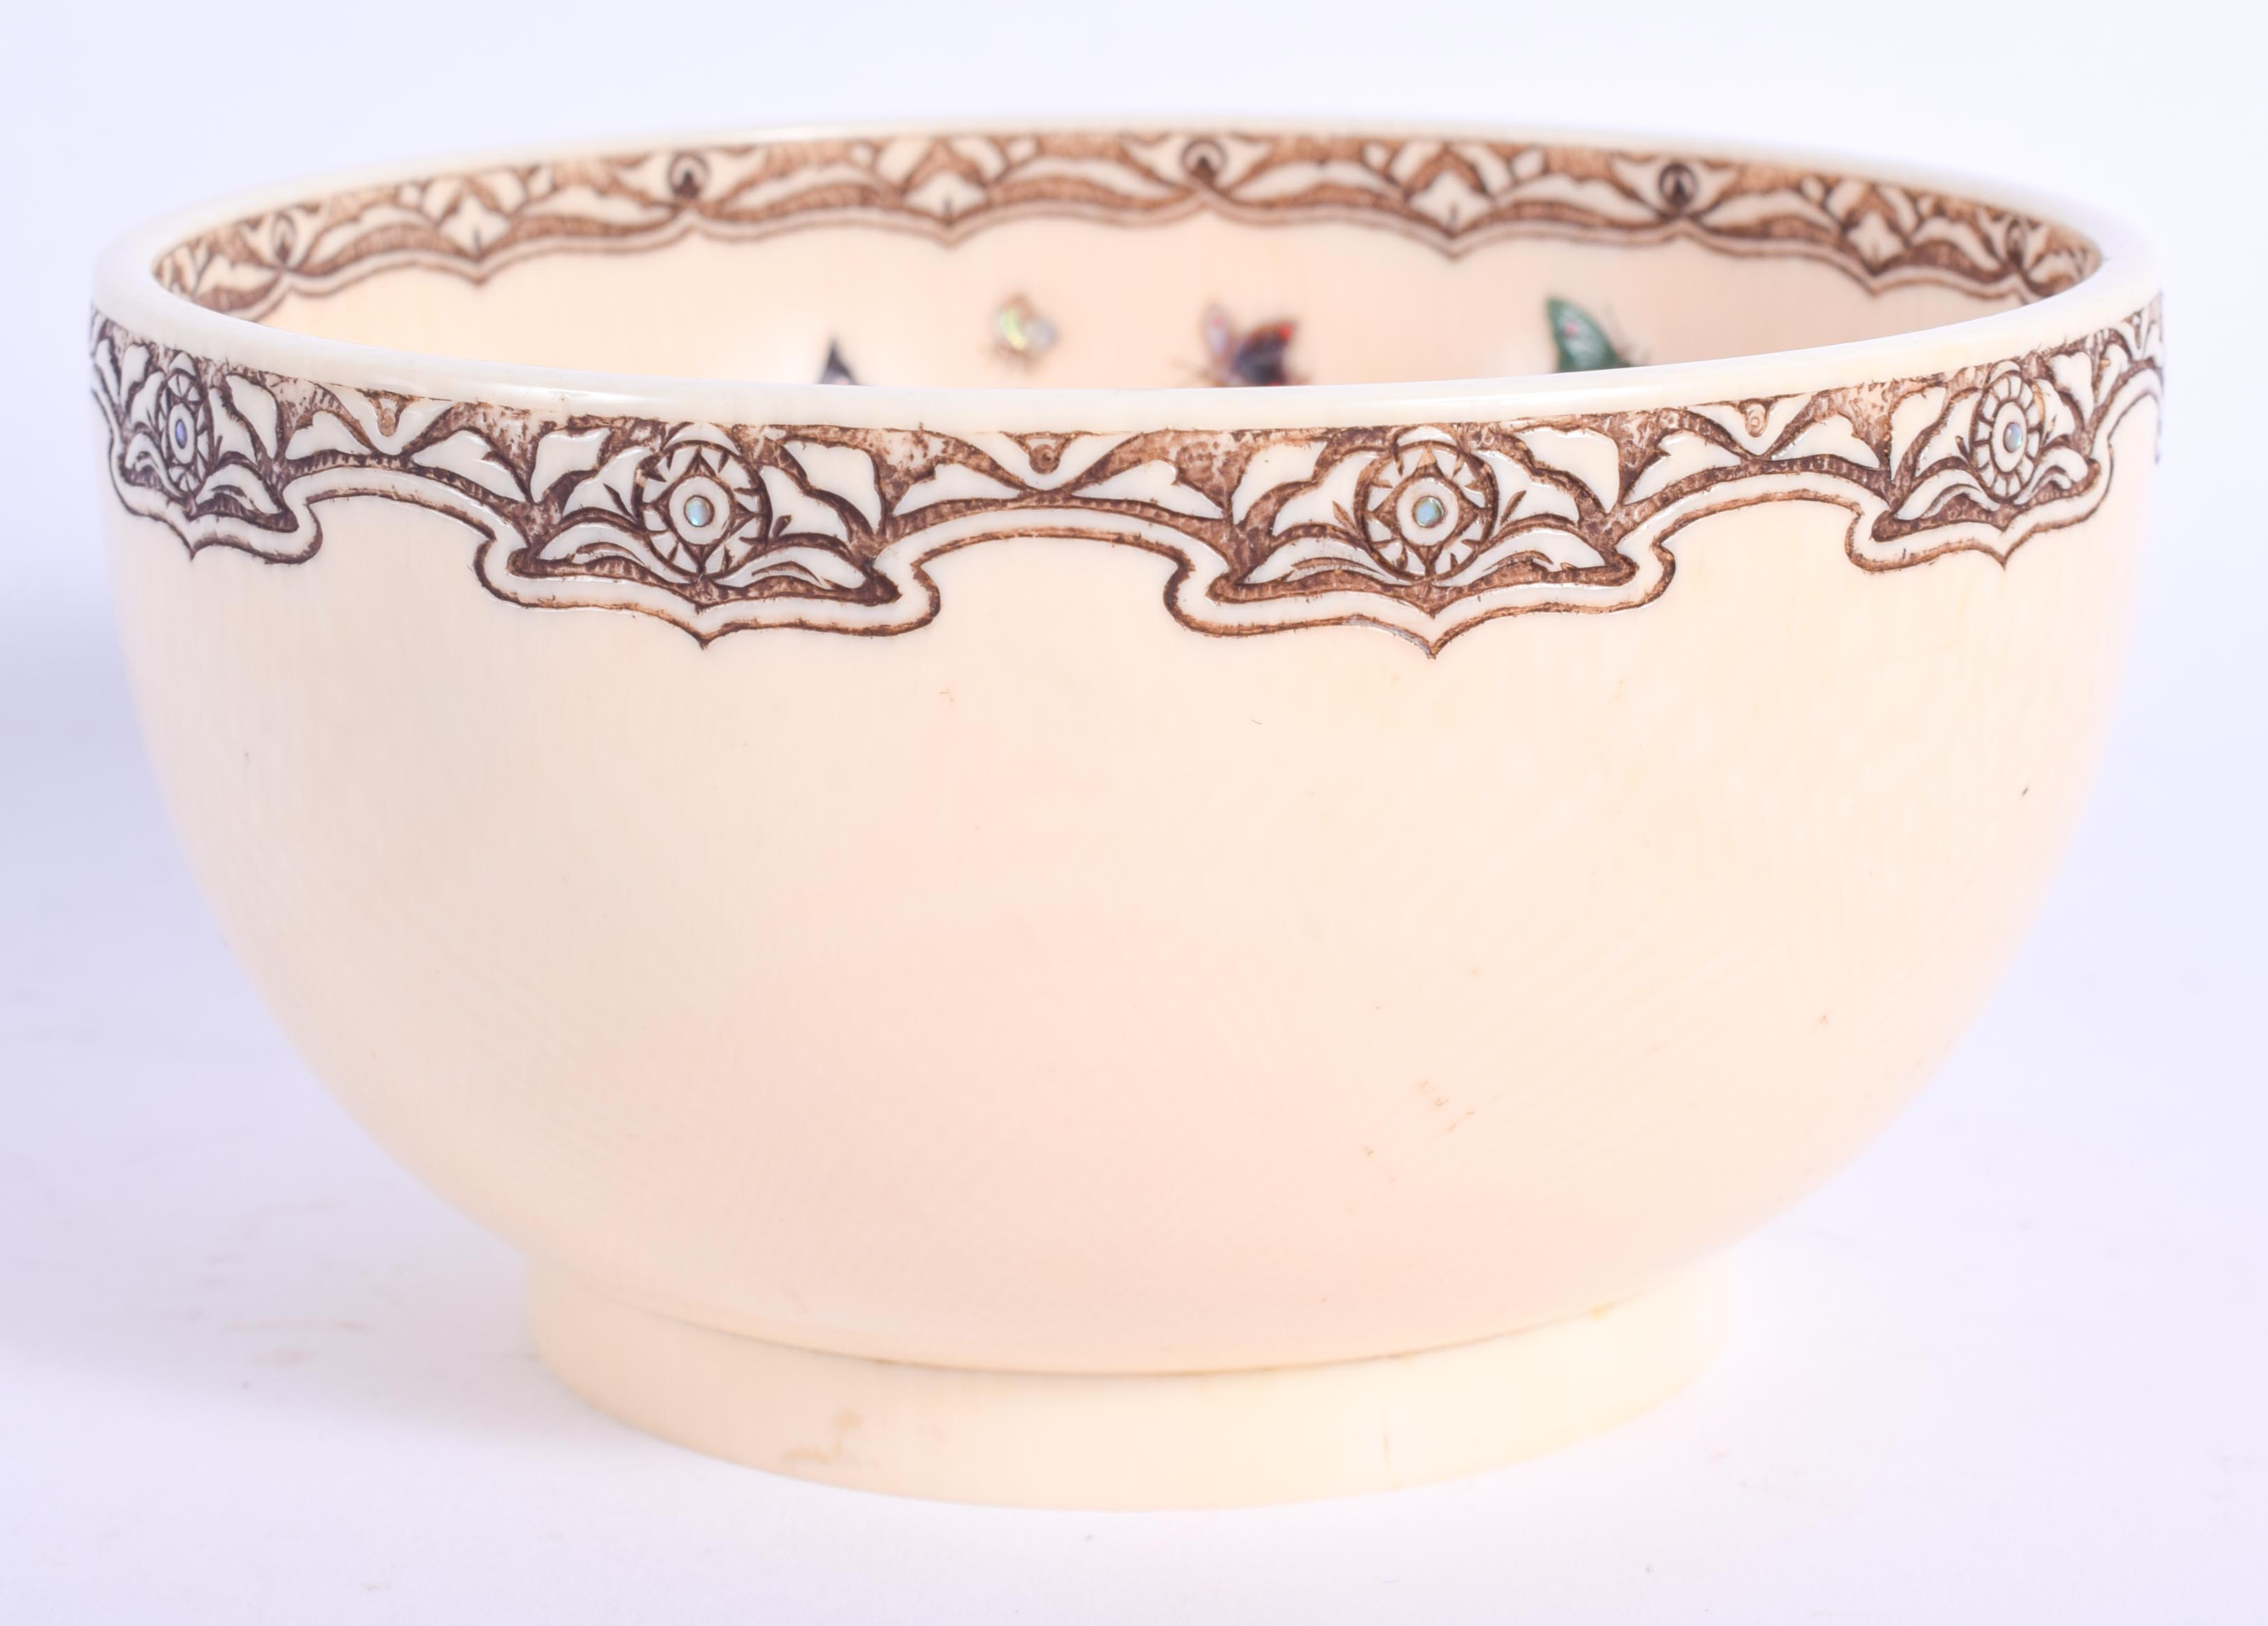 A FINE 19TH CENTURY JAPANESE MEIJI PERIOD CARVED SHIBAYAMA IVORY BOWL wonderfully decorated with but - Image 4 of 11